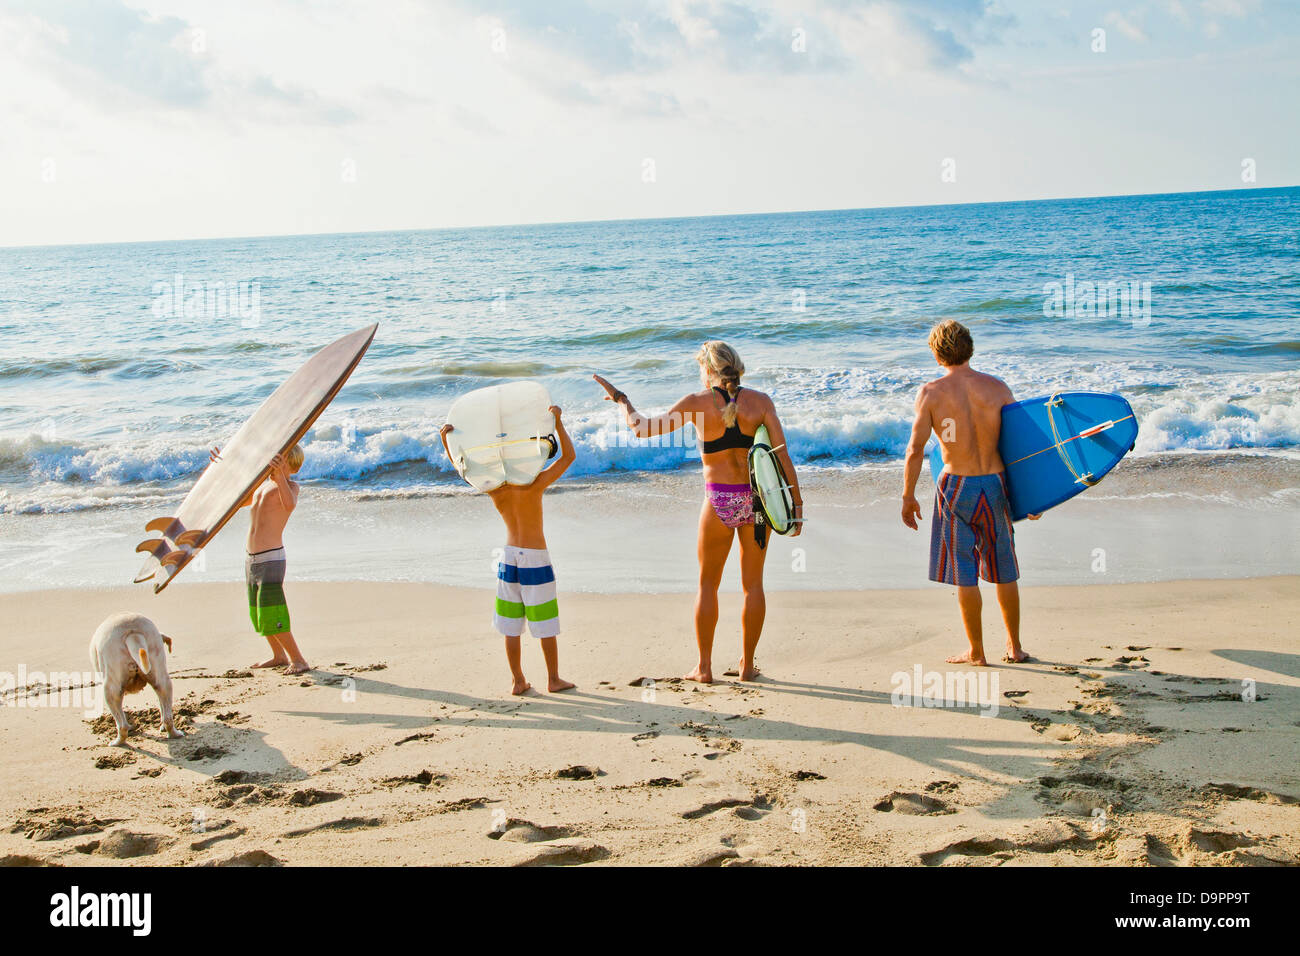 Family on beach holding surfboards Banque D'Images